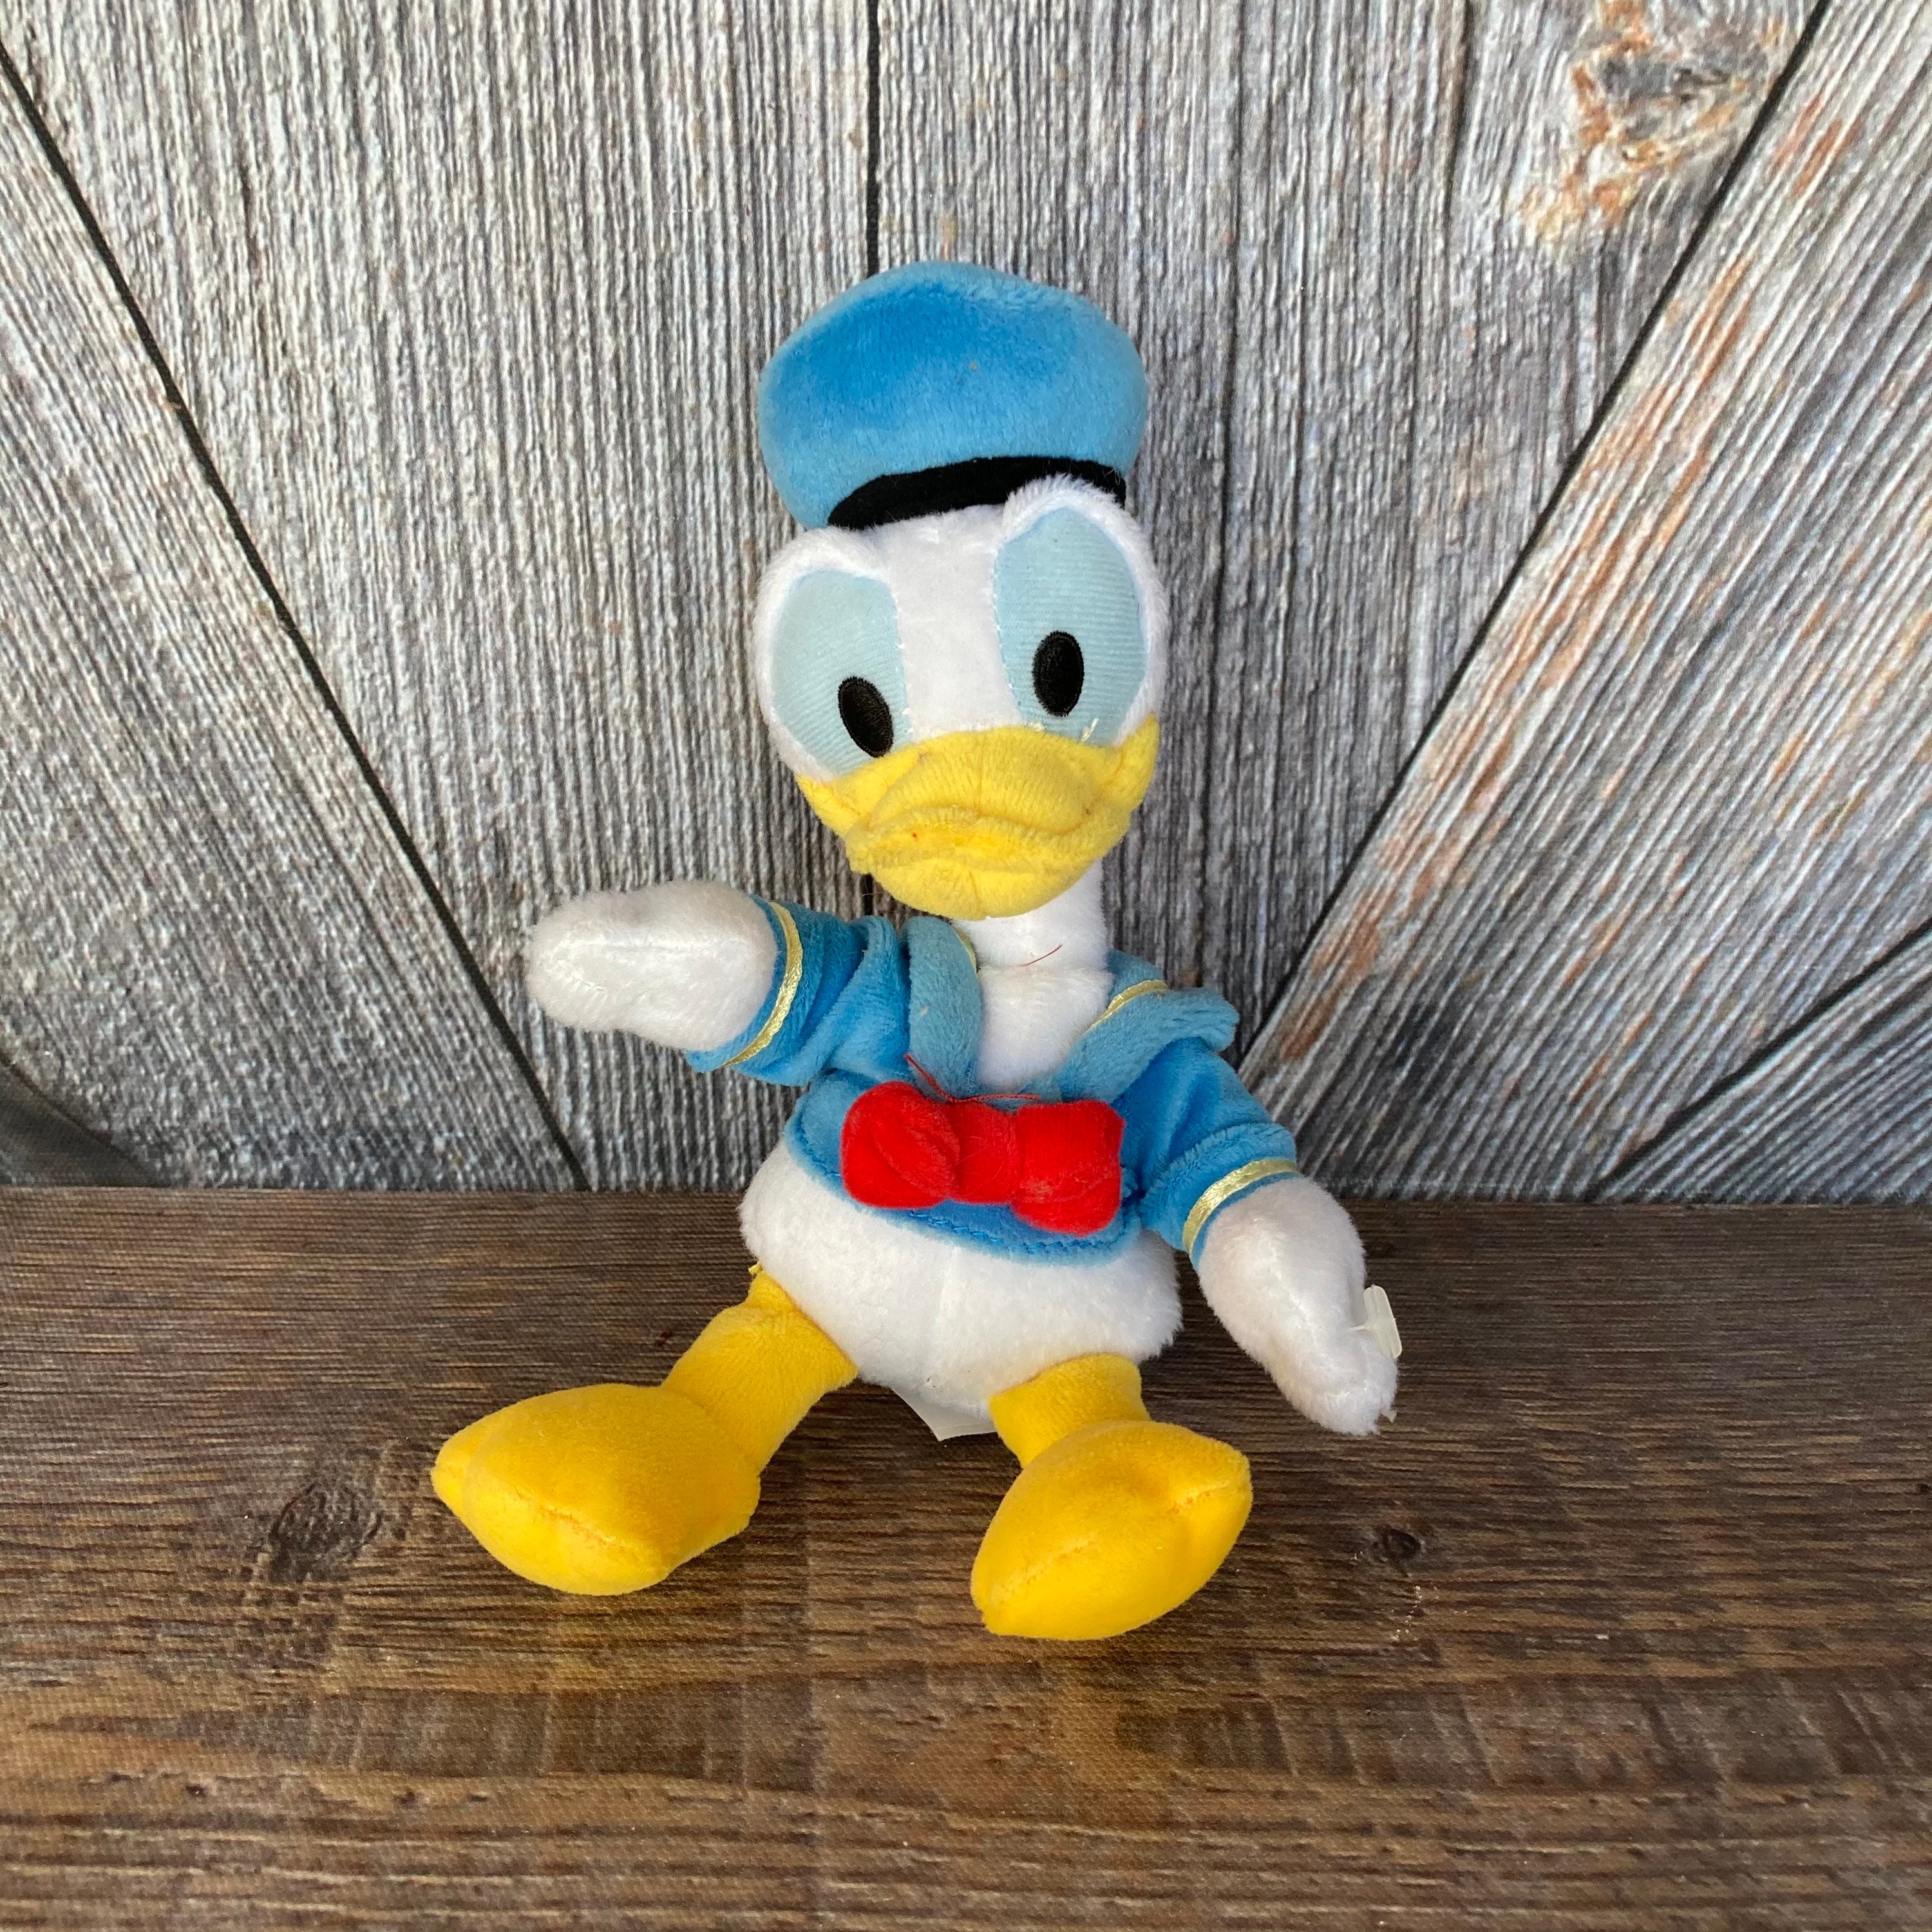 Disney Donald Duck Plush - Mini Bean Bag - 8 Inches, Mickey and Friends,  Cuddly Classic Toy Characte…See more Disney Donald Duck Plush - Mini Bean  Bag